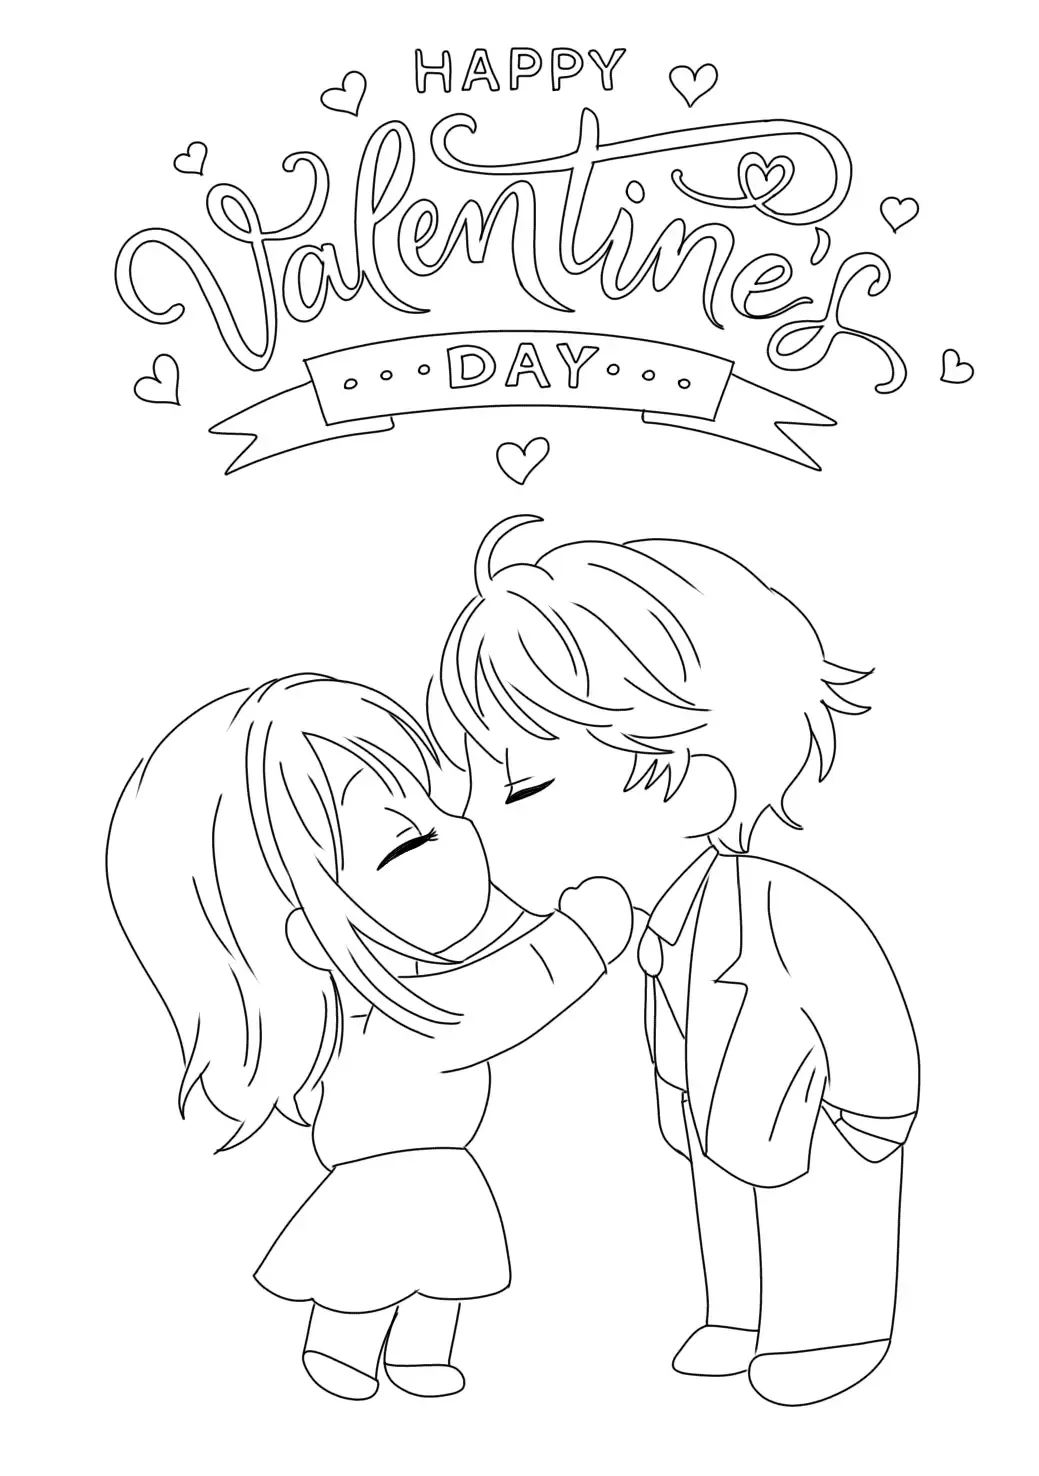 Happy Valentine's day chibi coloring pages